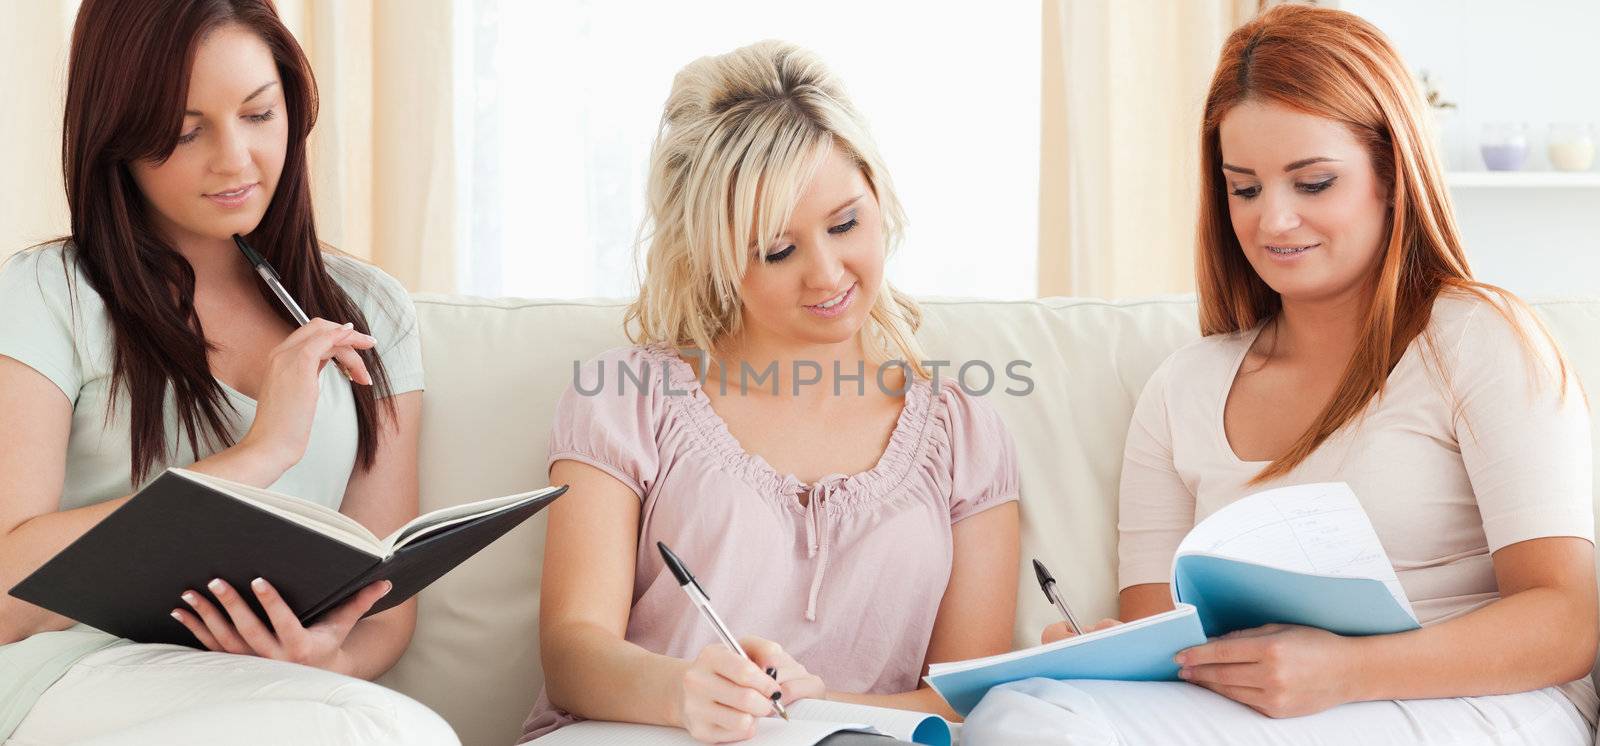 Charming women studying together by Wavebreakmedia